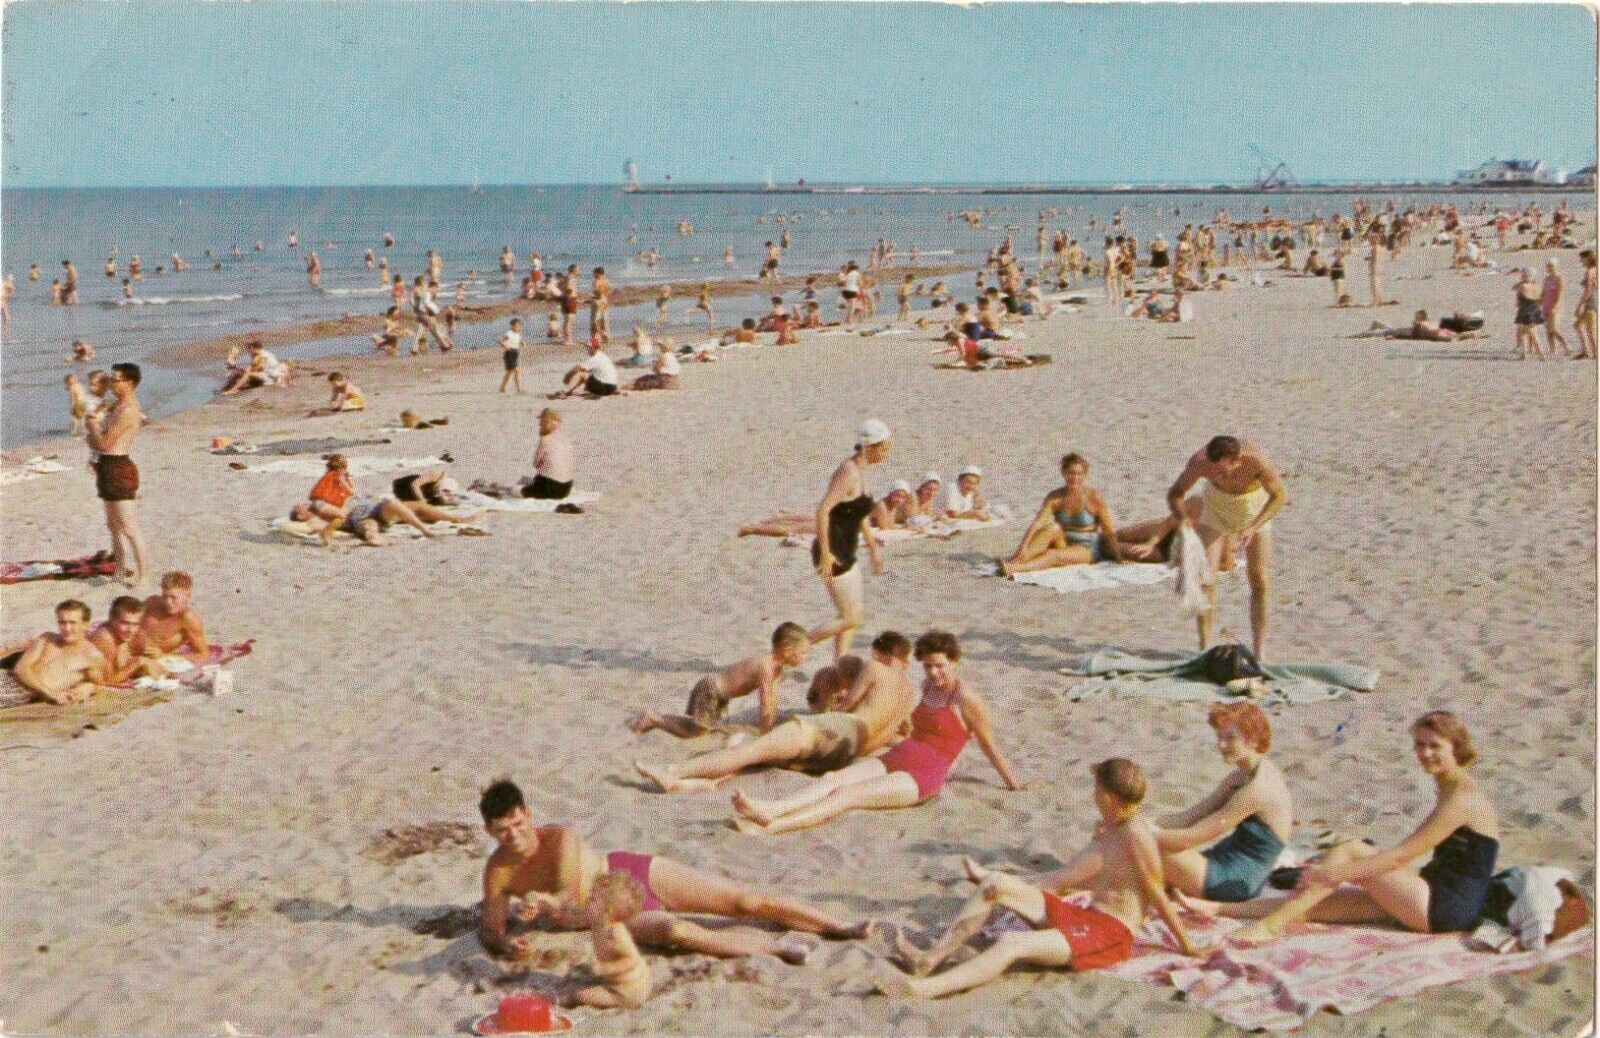 Lake Michigan at Racine, Wisconsin WI with beach goers-vintage 1950s postcard